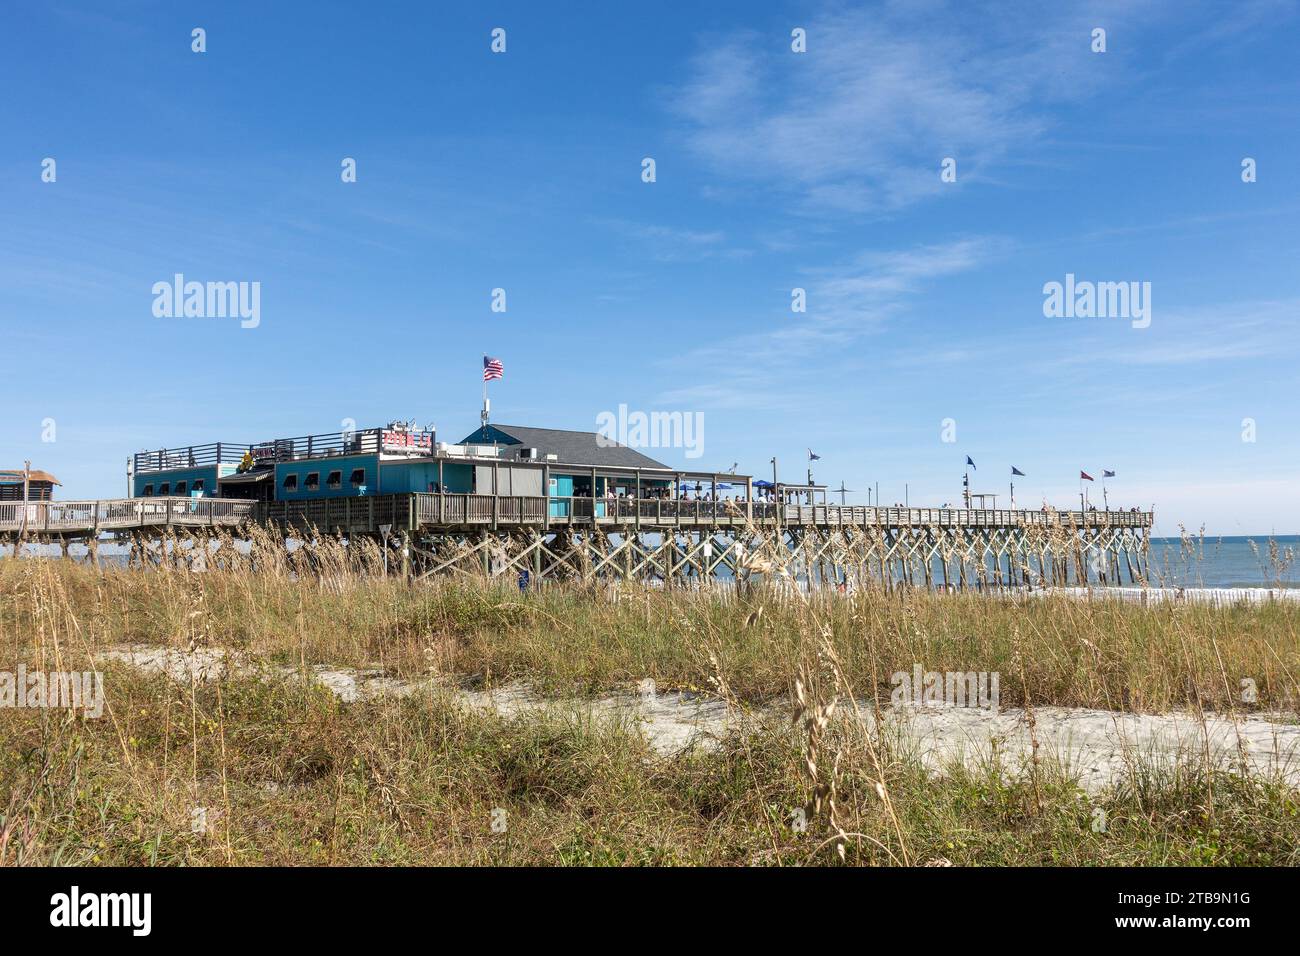 Pier 14 Myrtle Beach, South Carolina United States, Restaurant And Fishing Pier Stock Photo